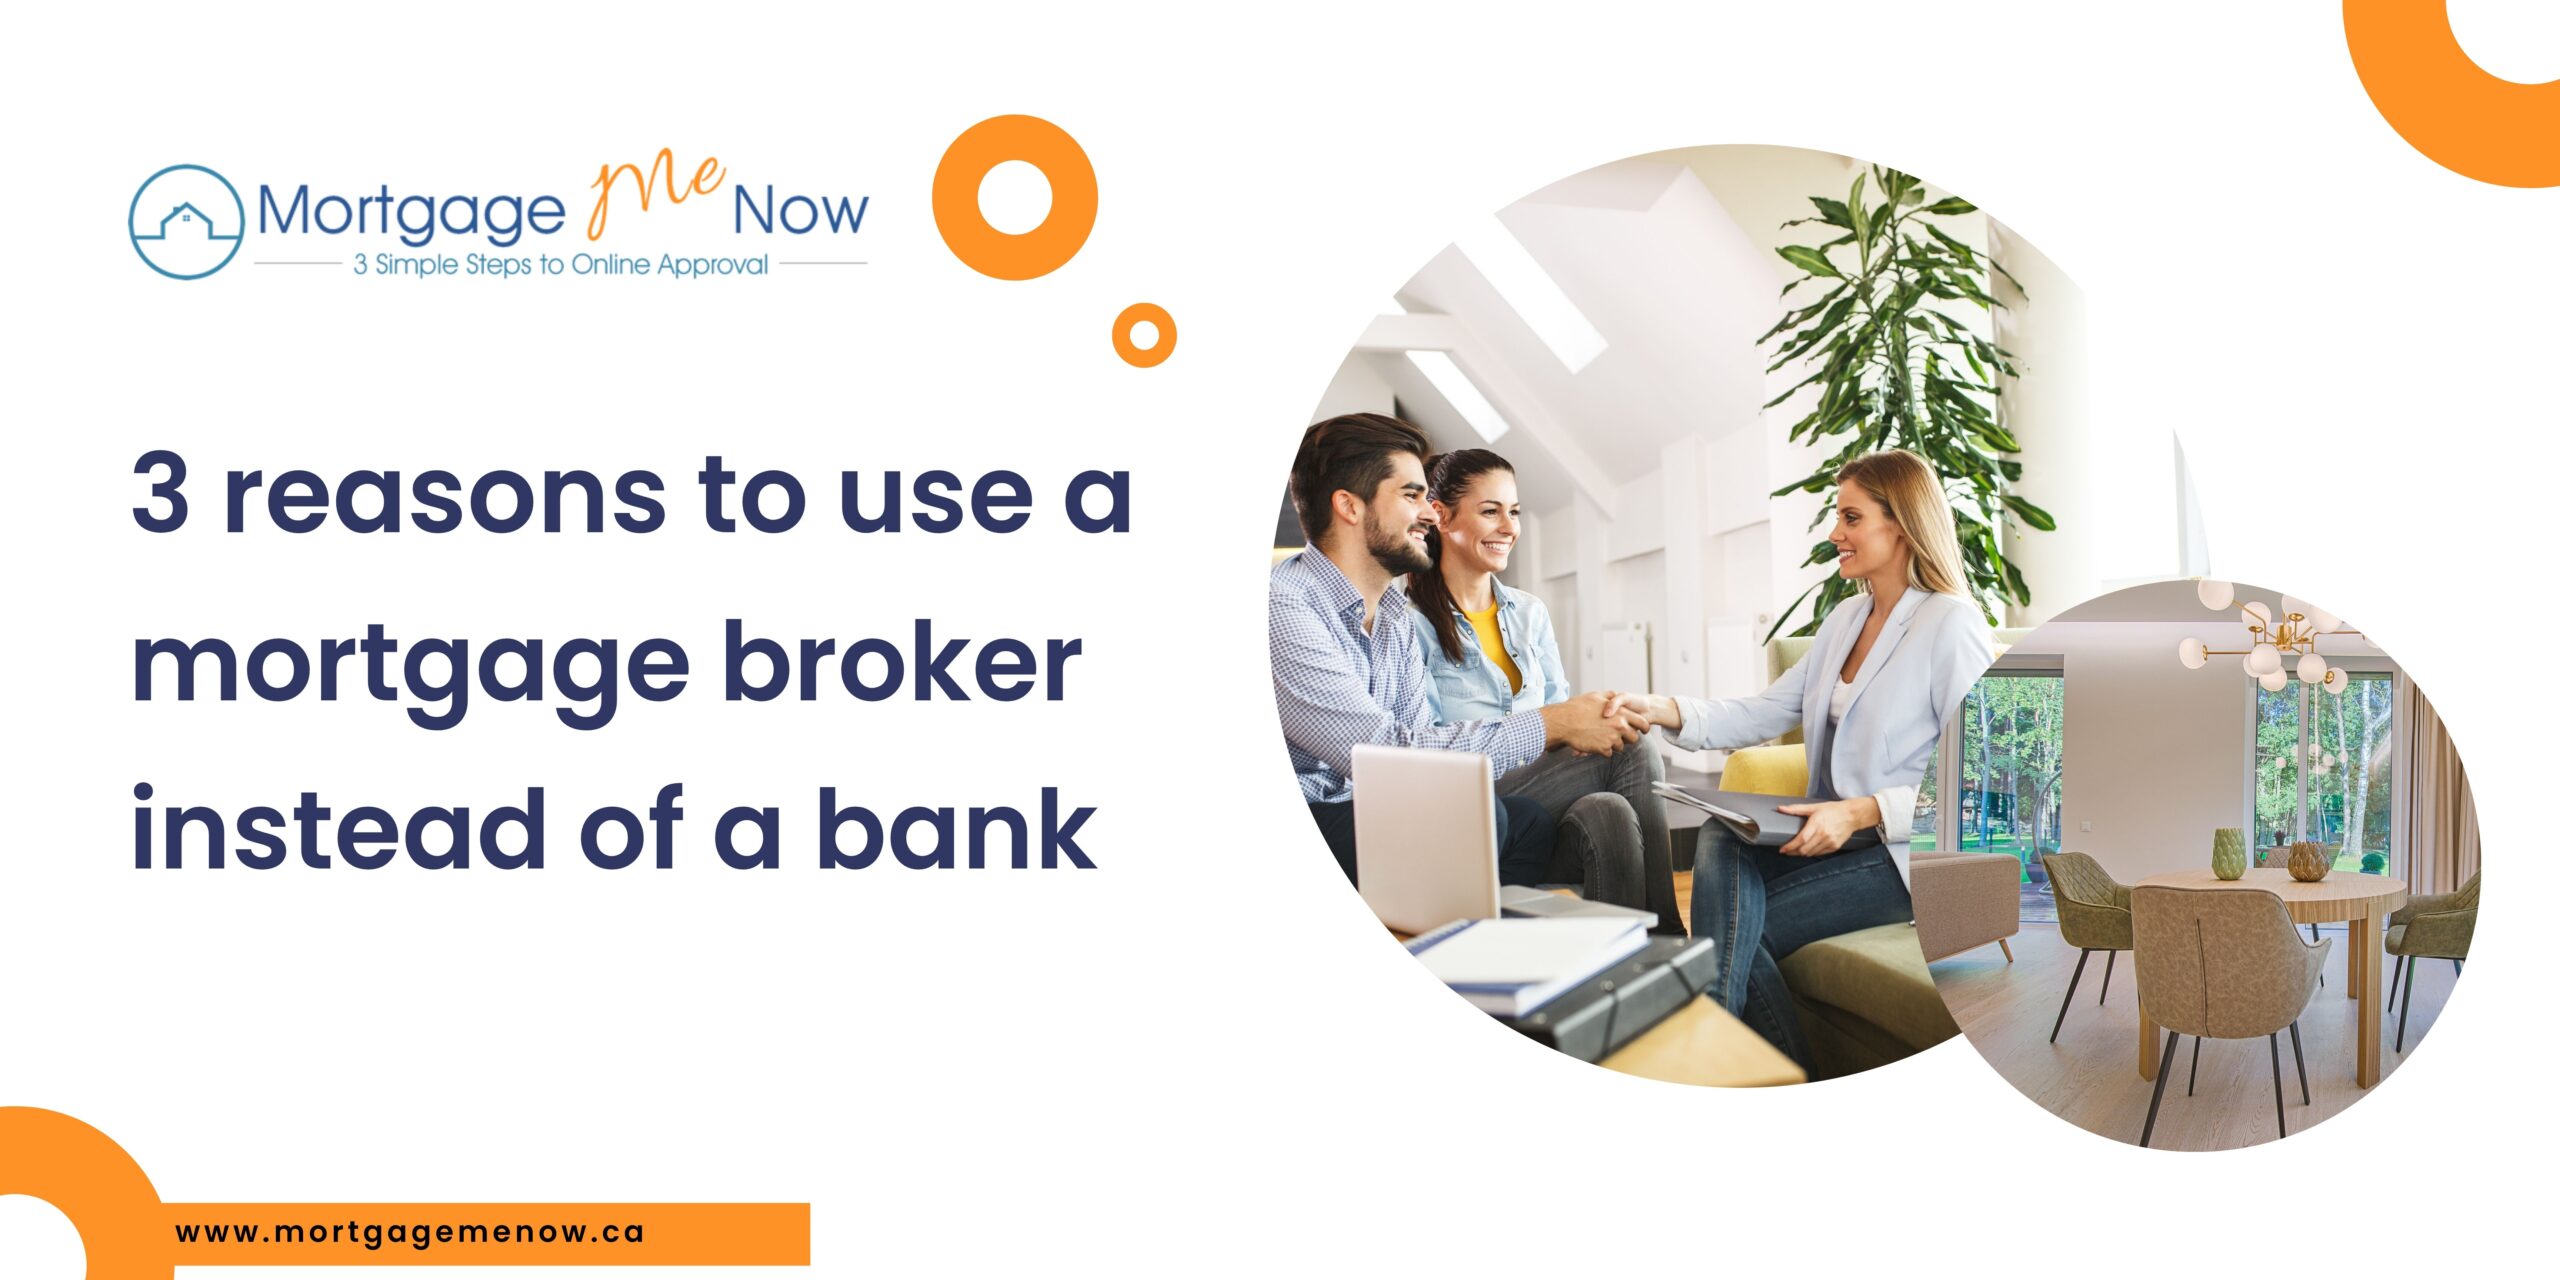 3 Reasons to use a Mortgage Broker instead of a bank